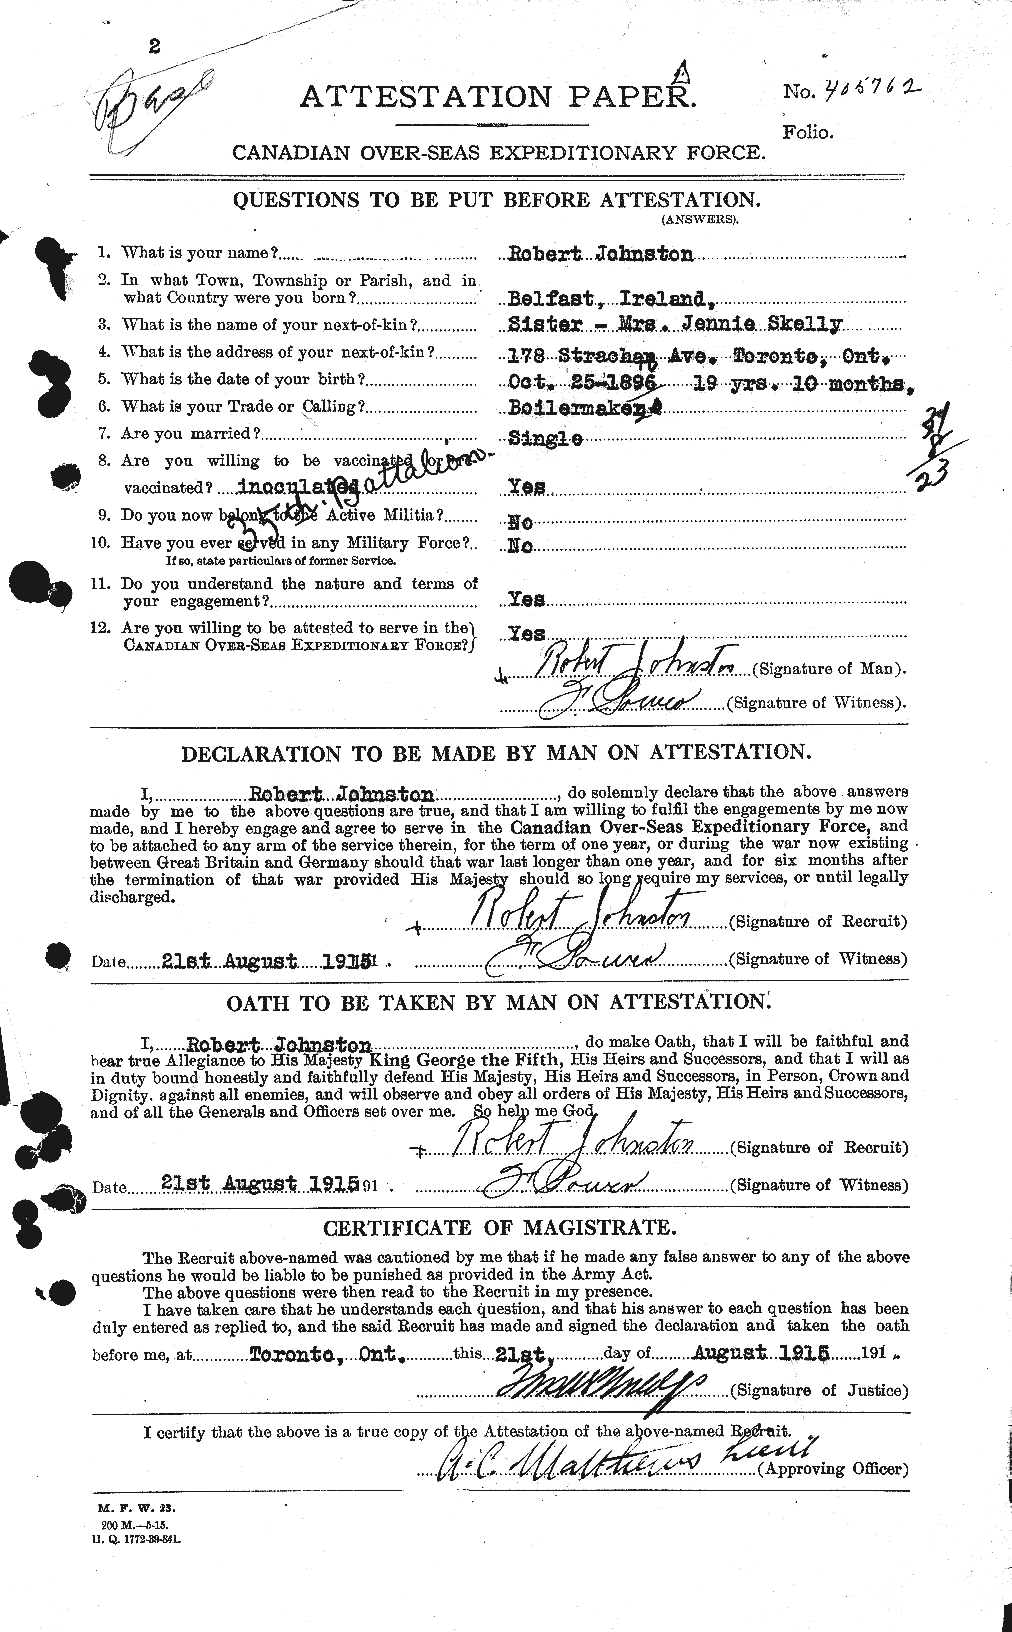 Personnel Records of the First World War - CEF 426997a